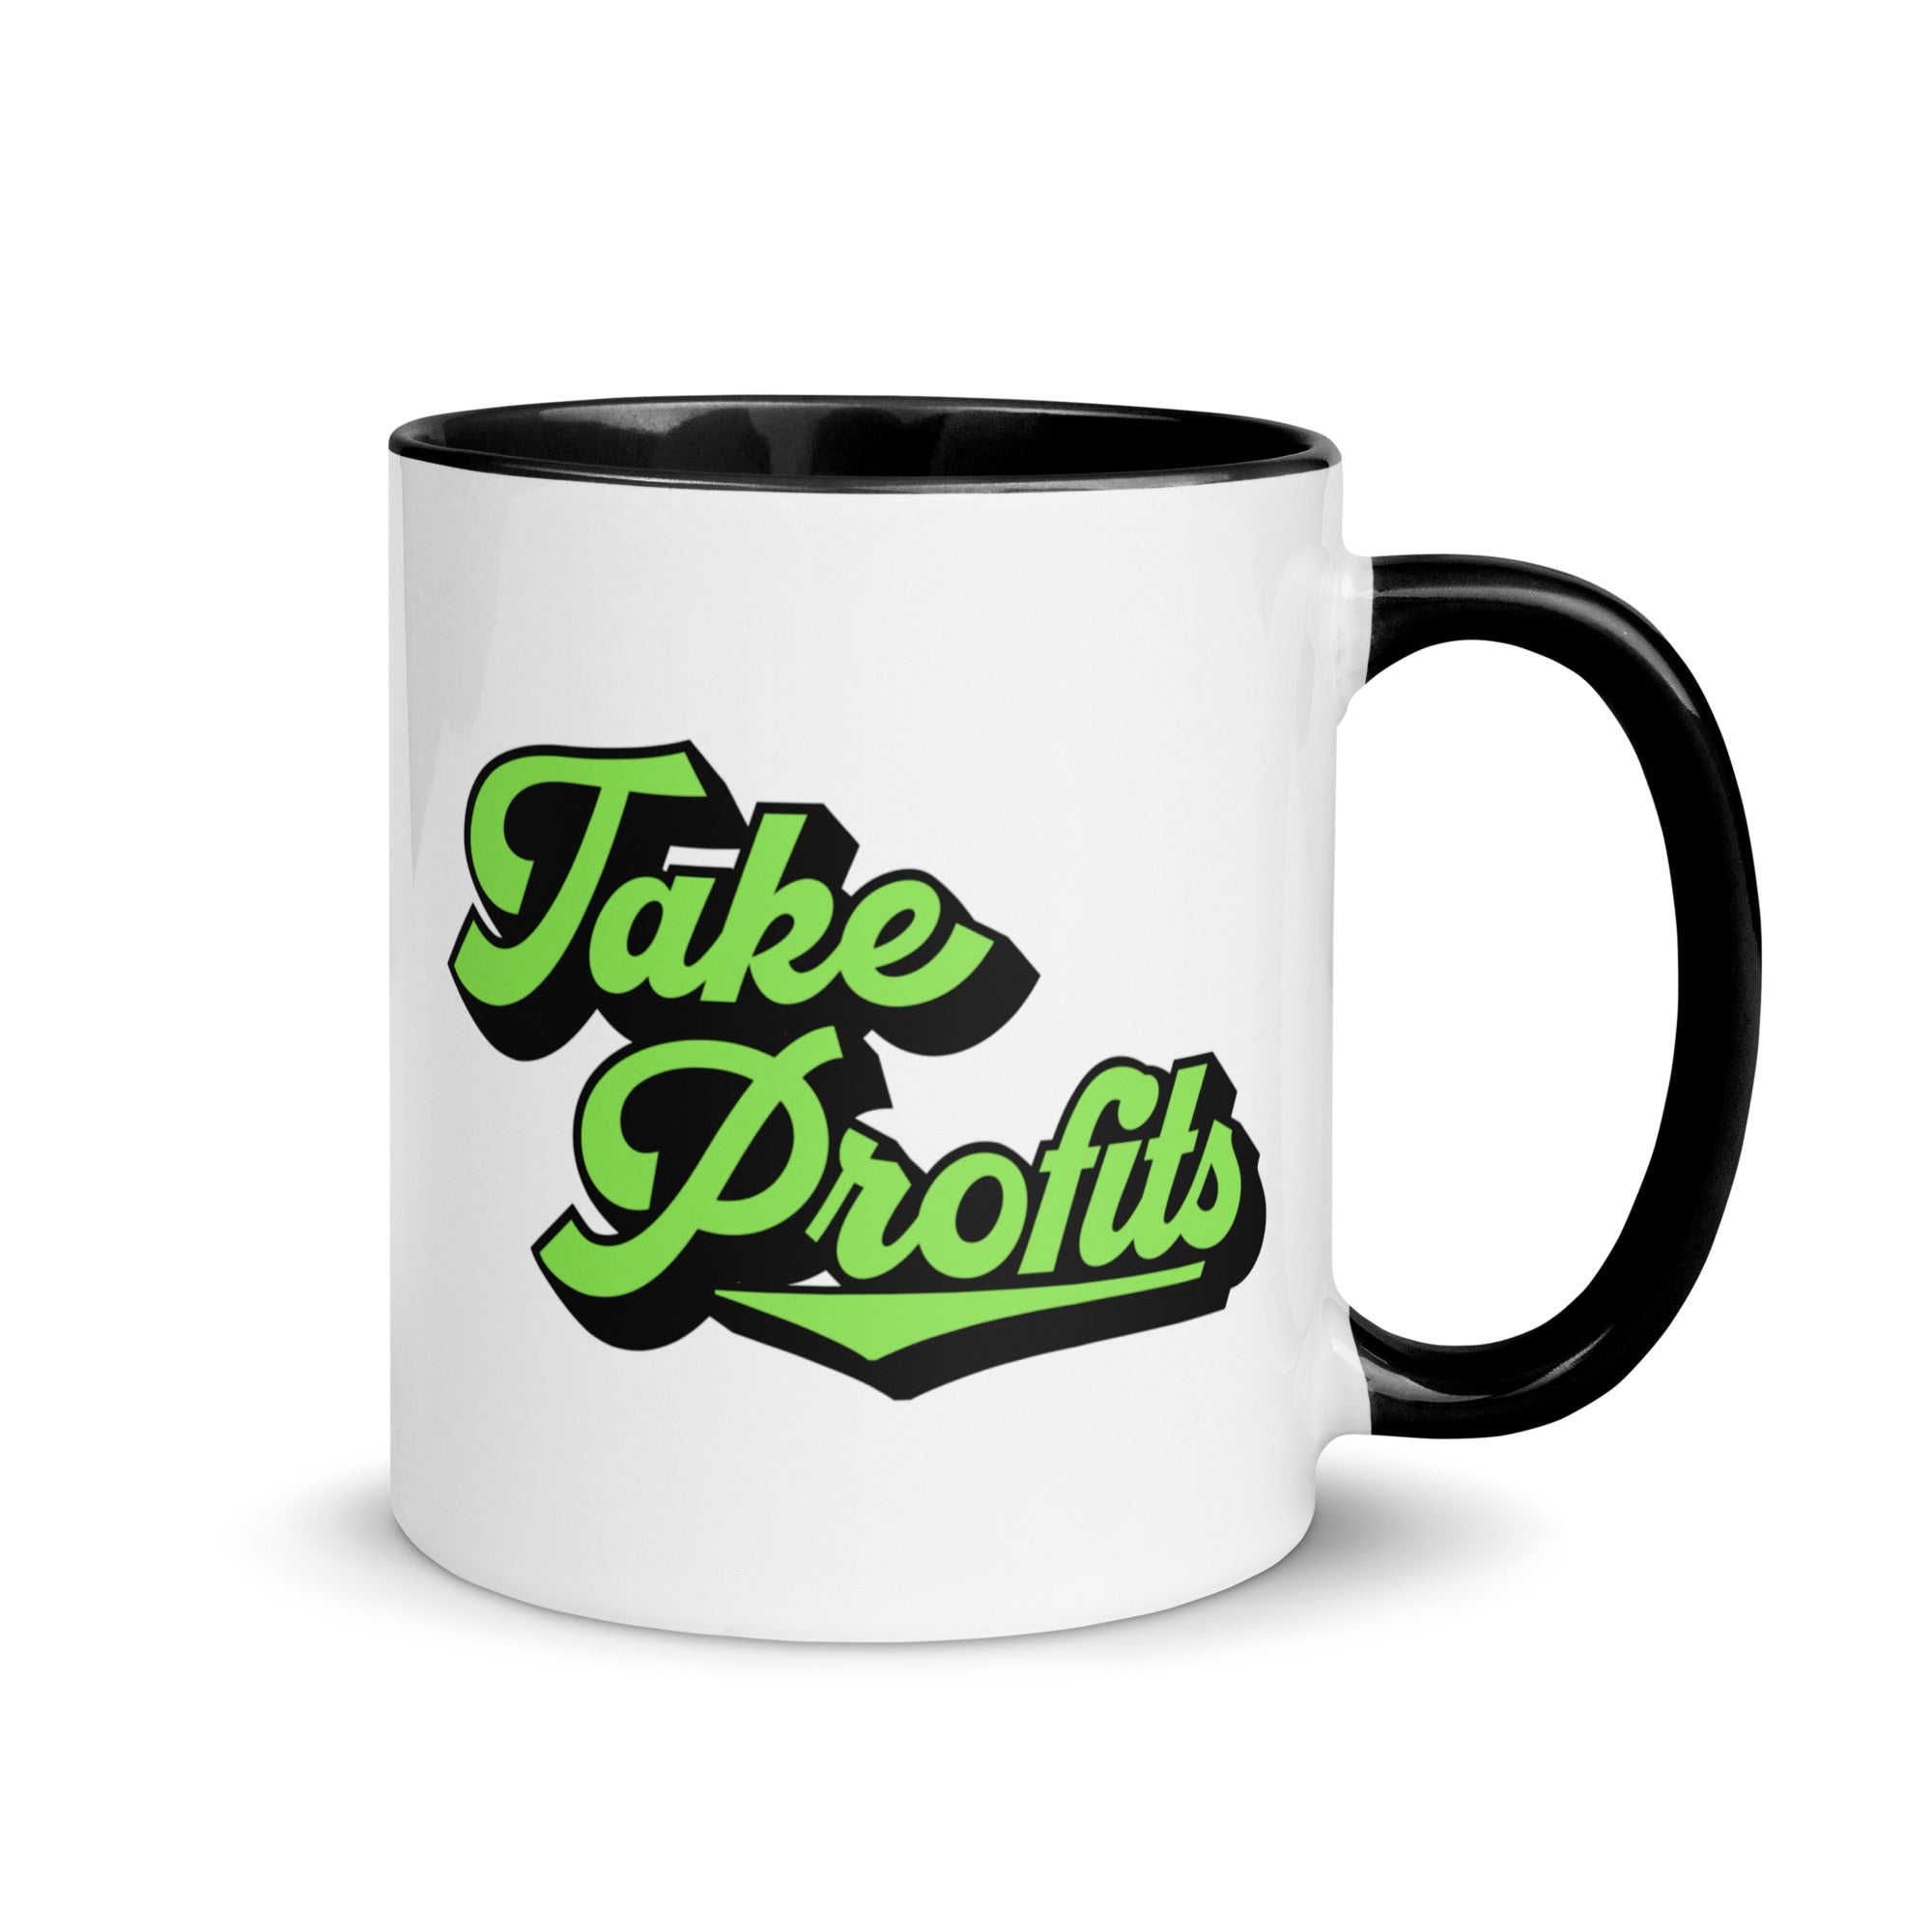 Gifts for Crypto Lovers - Take Profits Mug. Right handle view.